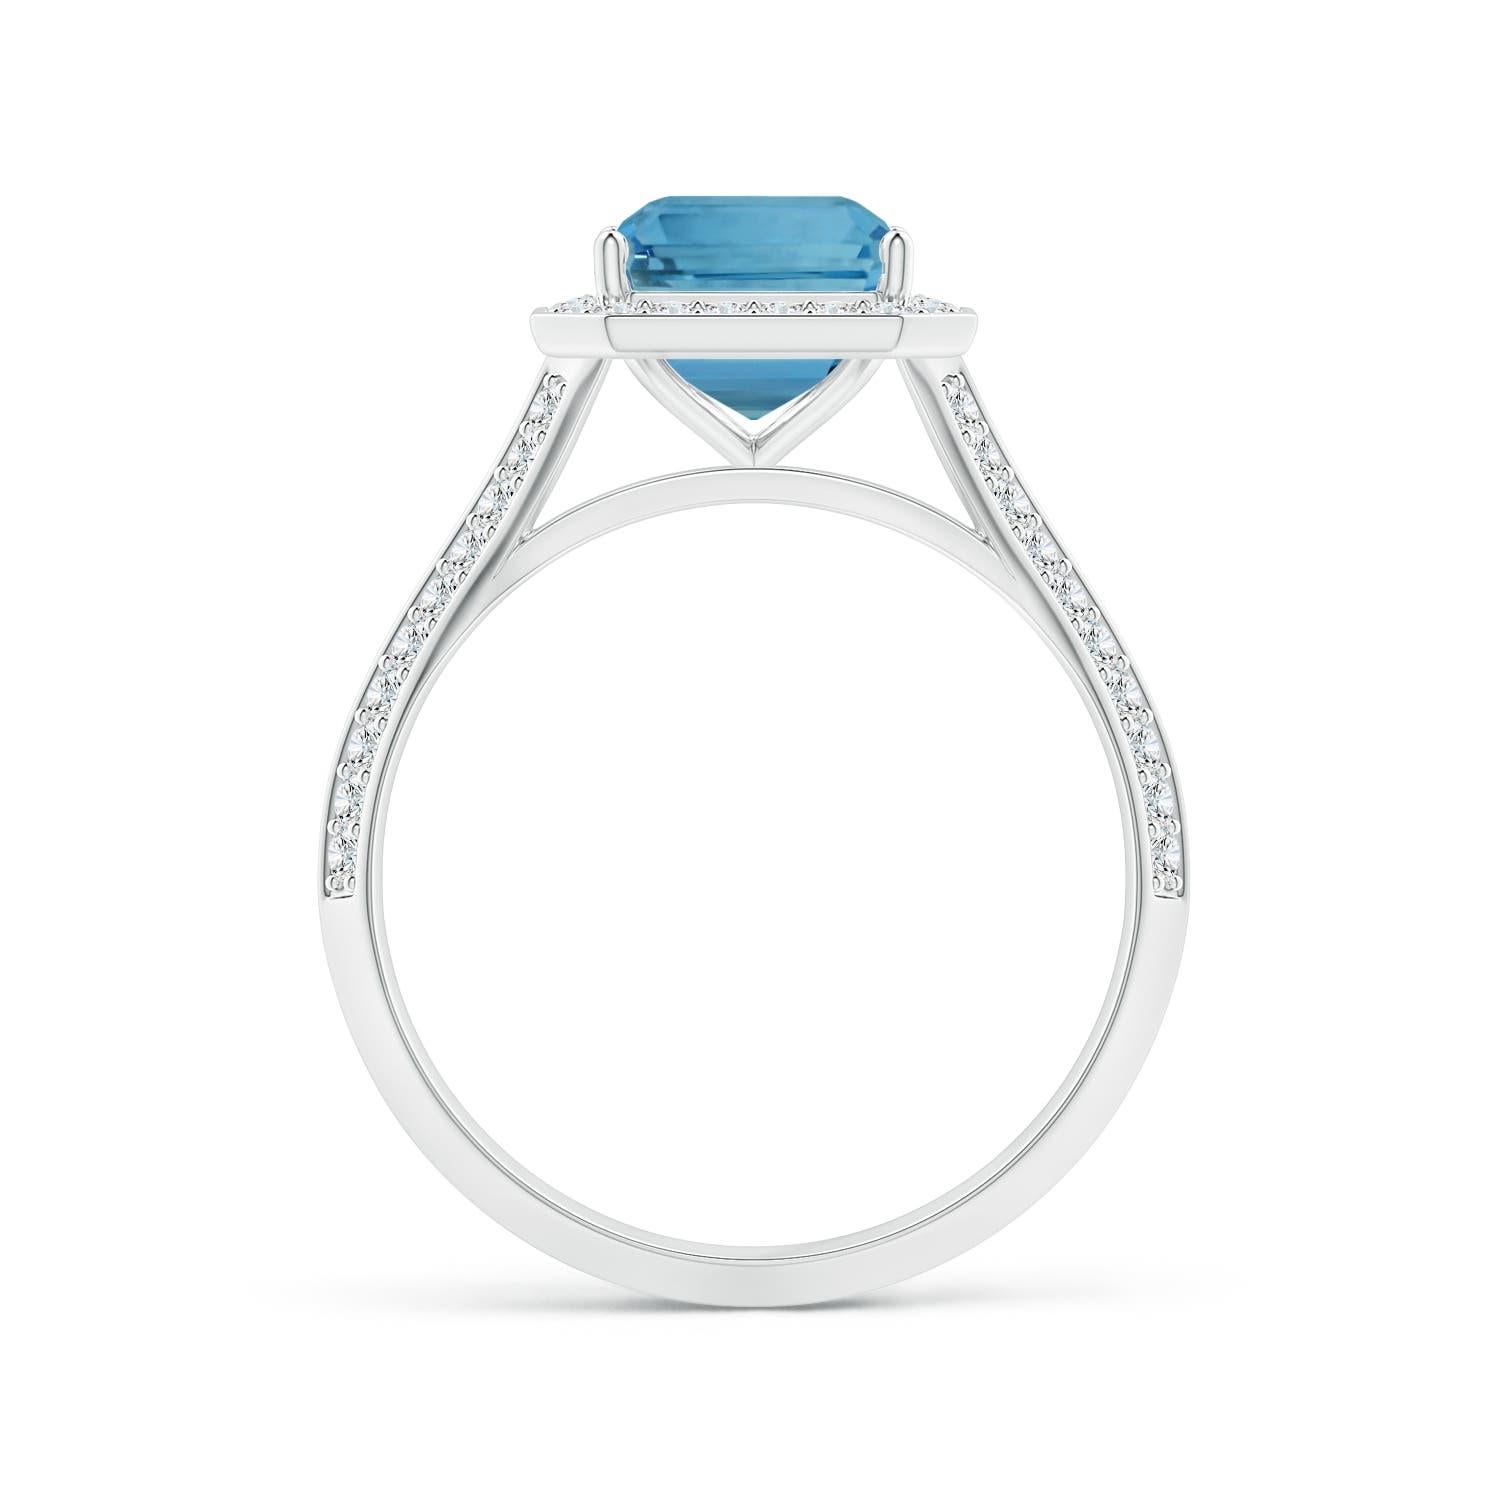 For Sale:  ANGARA GIA Certified Natural Emerald-Cut Aquamarine Halo Ring in White Gold 2